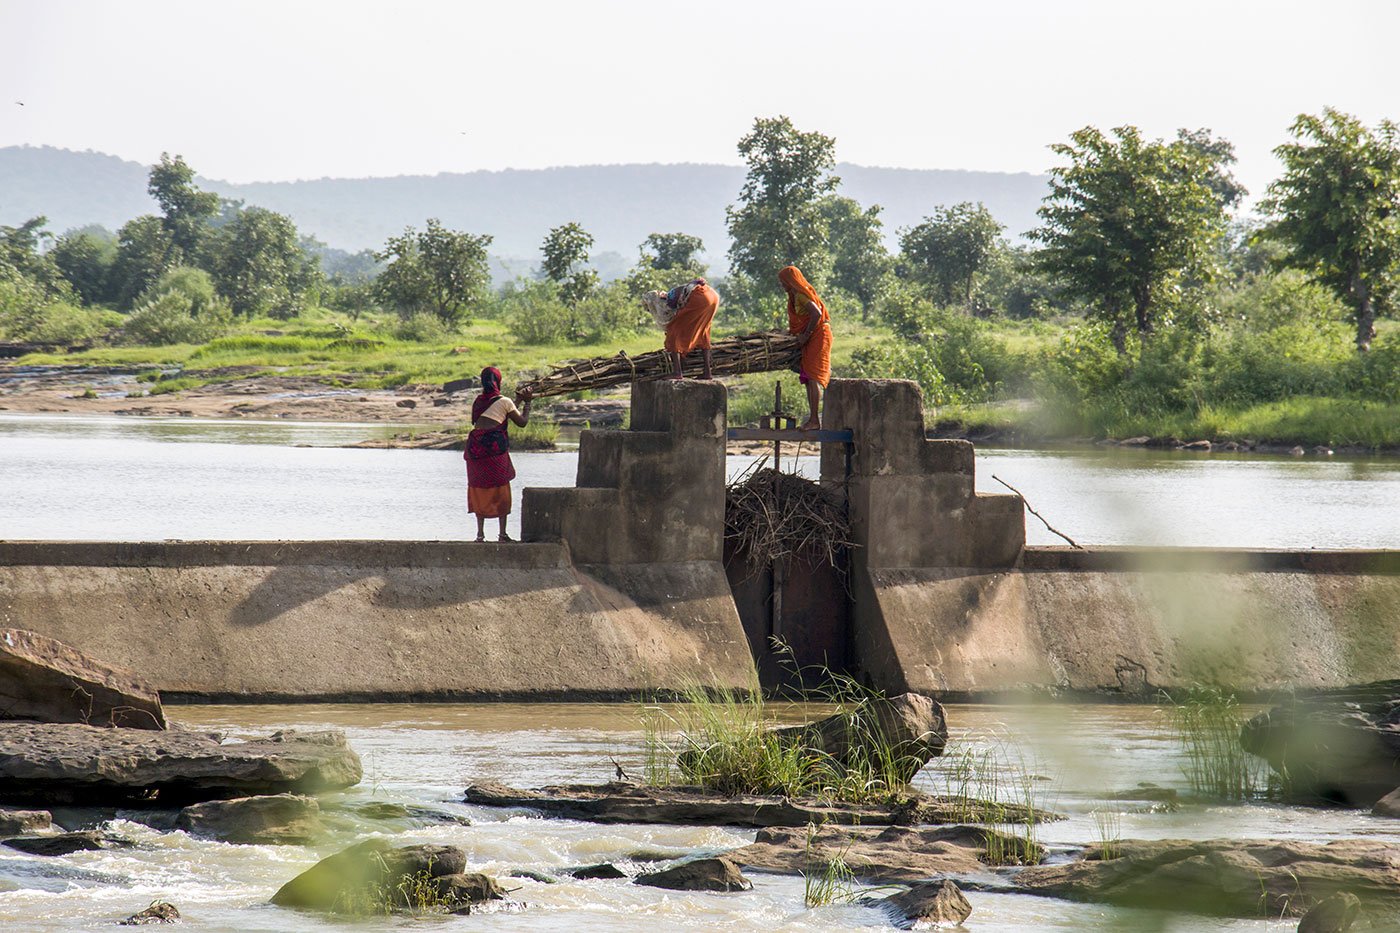 Women crossing the sluice gate of a dam, carrying their daily load of firewood